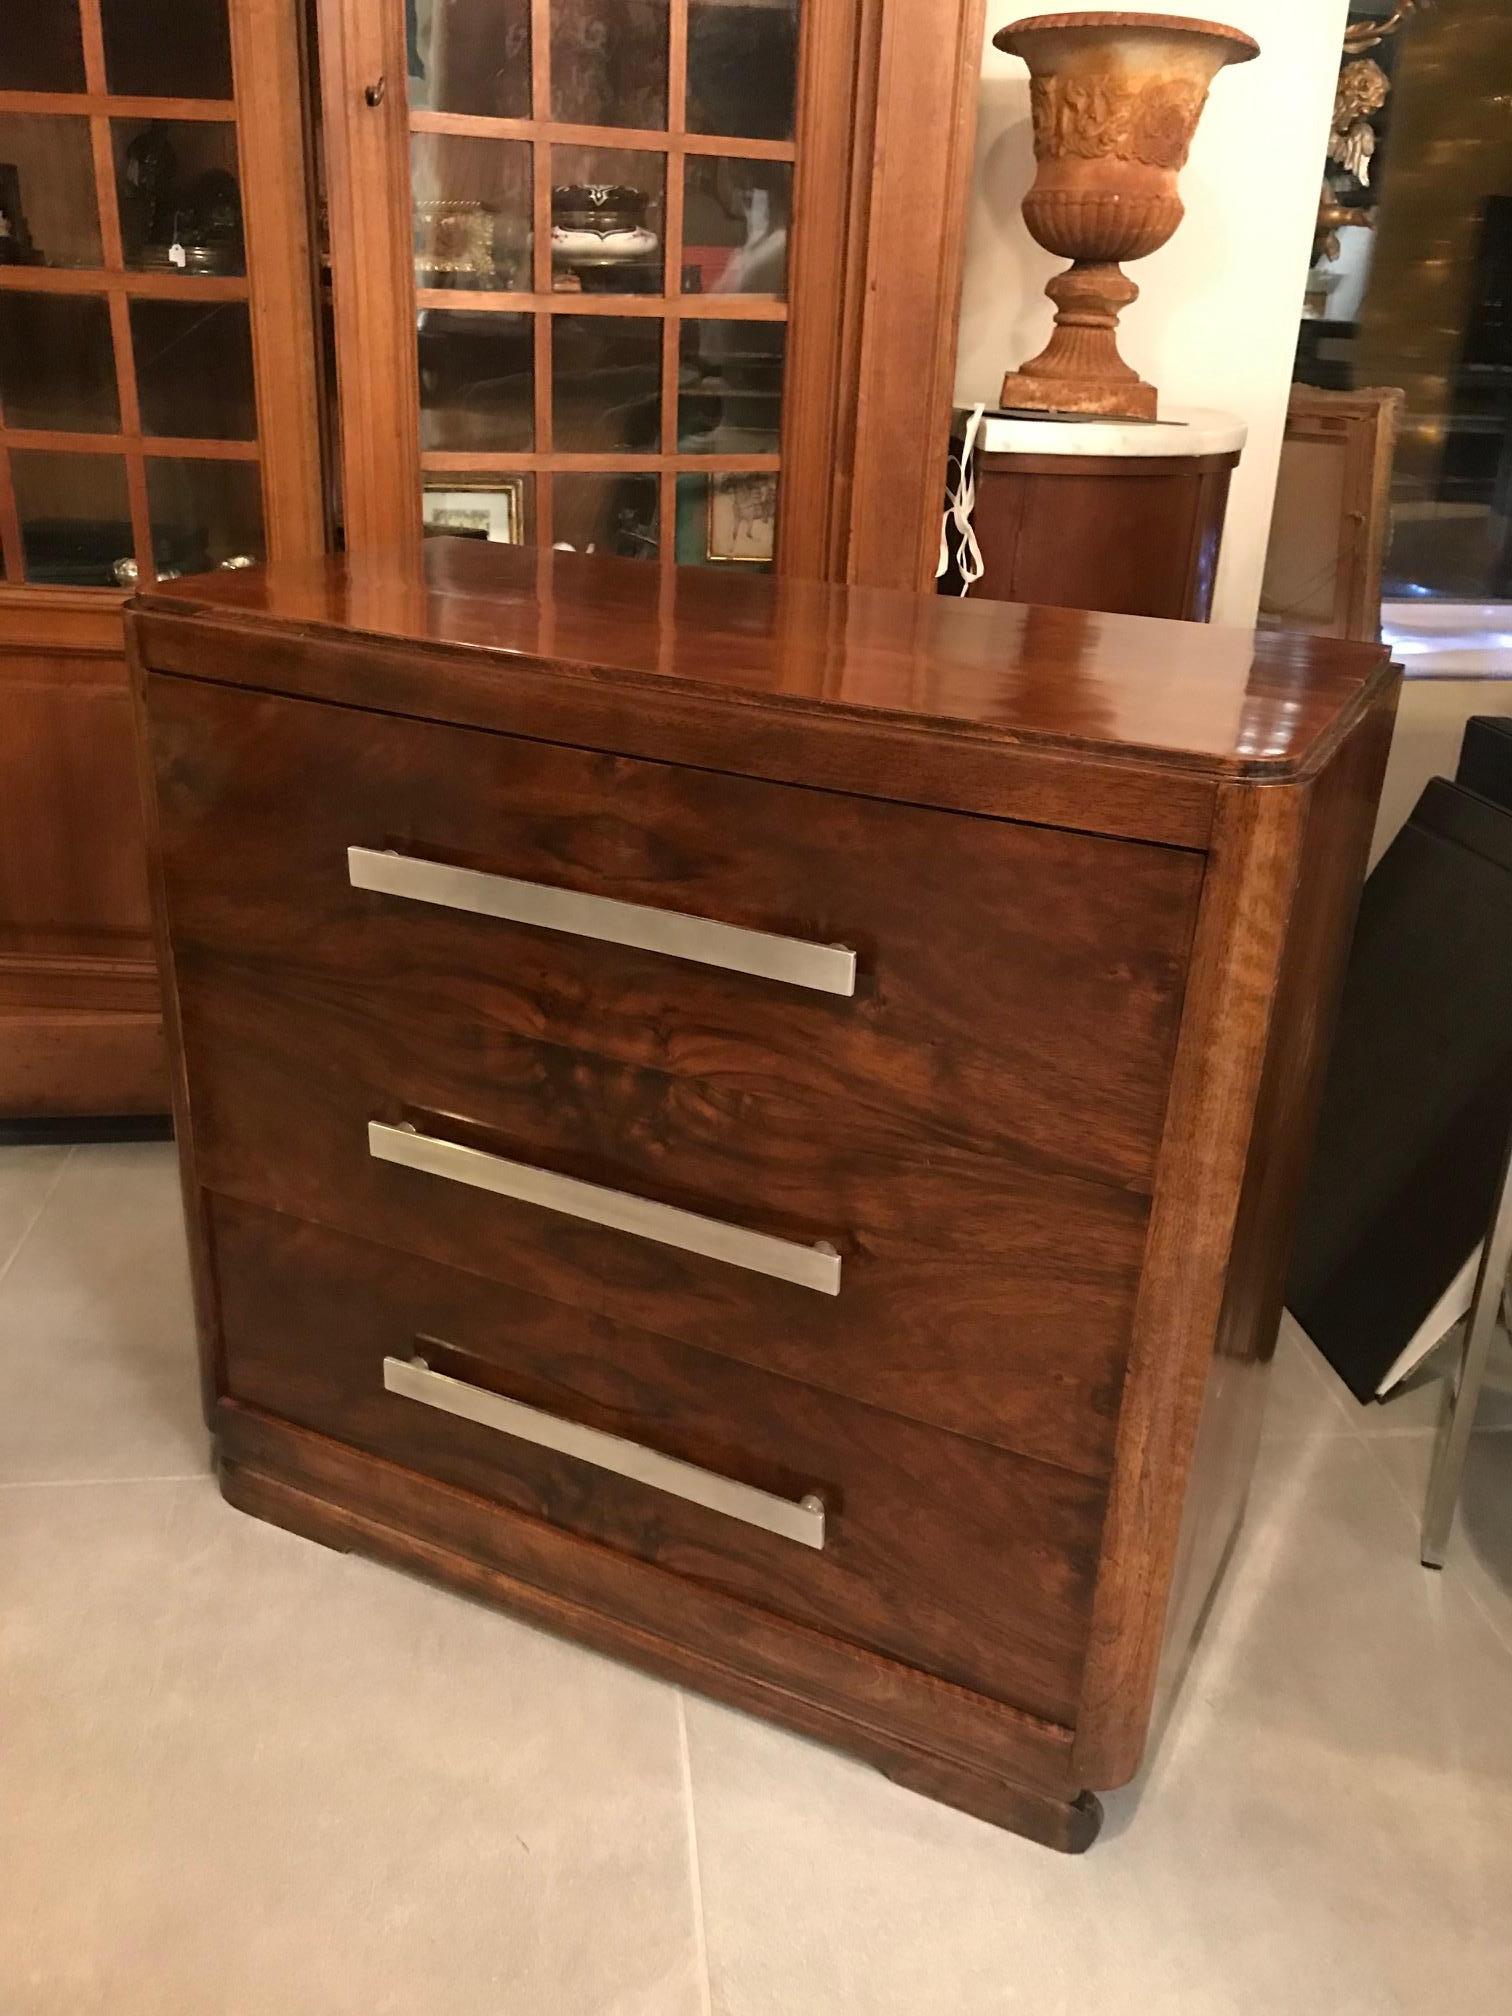 Beautiful 20th century French walnut and chromed metal commode from the 1940s. 
Has been restored by a cabinetmaker. This commode is very interesting because the size is ideal. Can be used as a bedside or in a living room. Three large drawers with